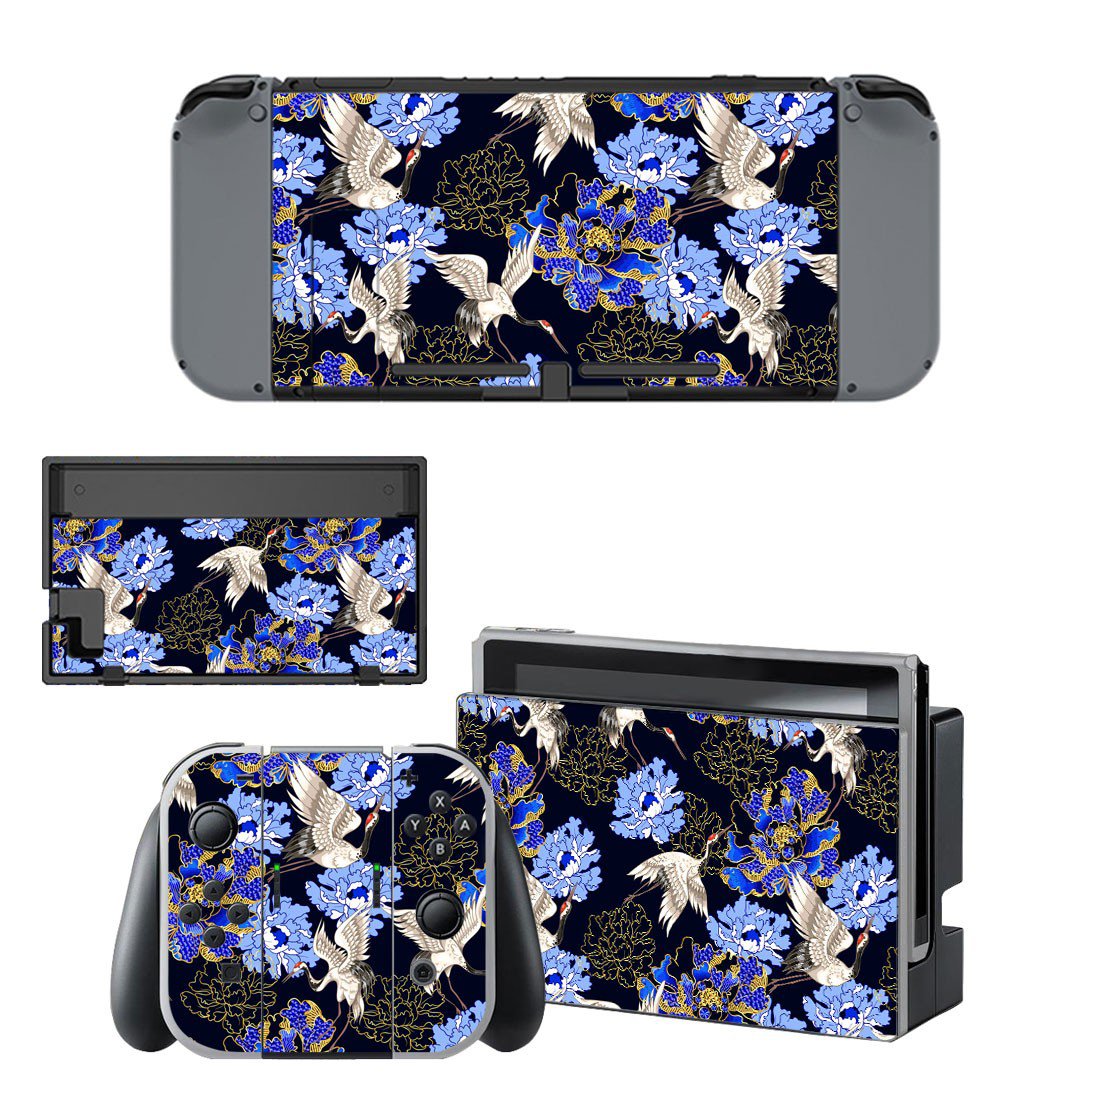 Floral Land Decal Skin Sticker for Nintendo Switch